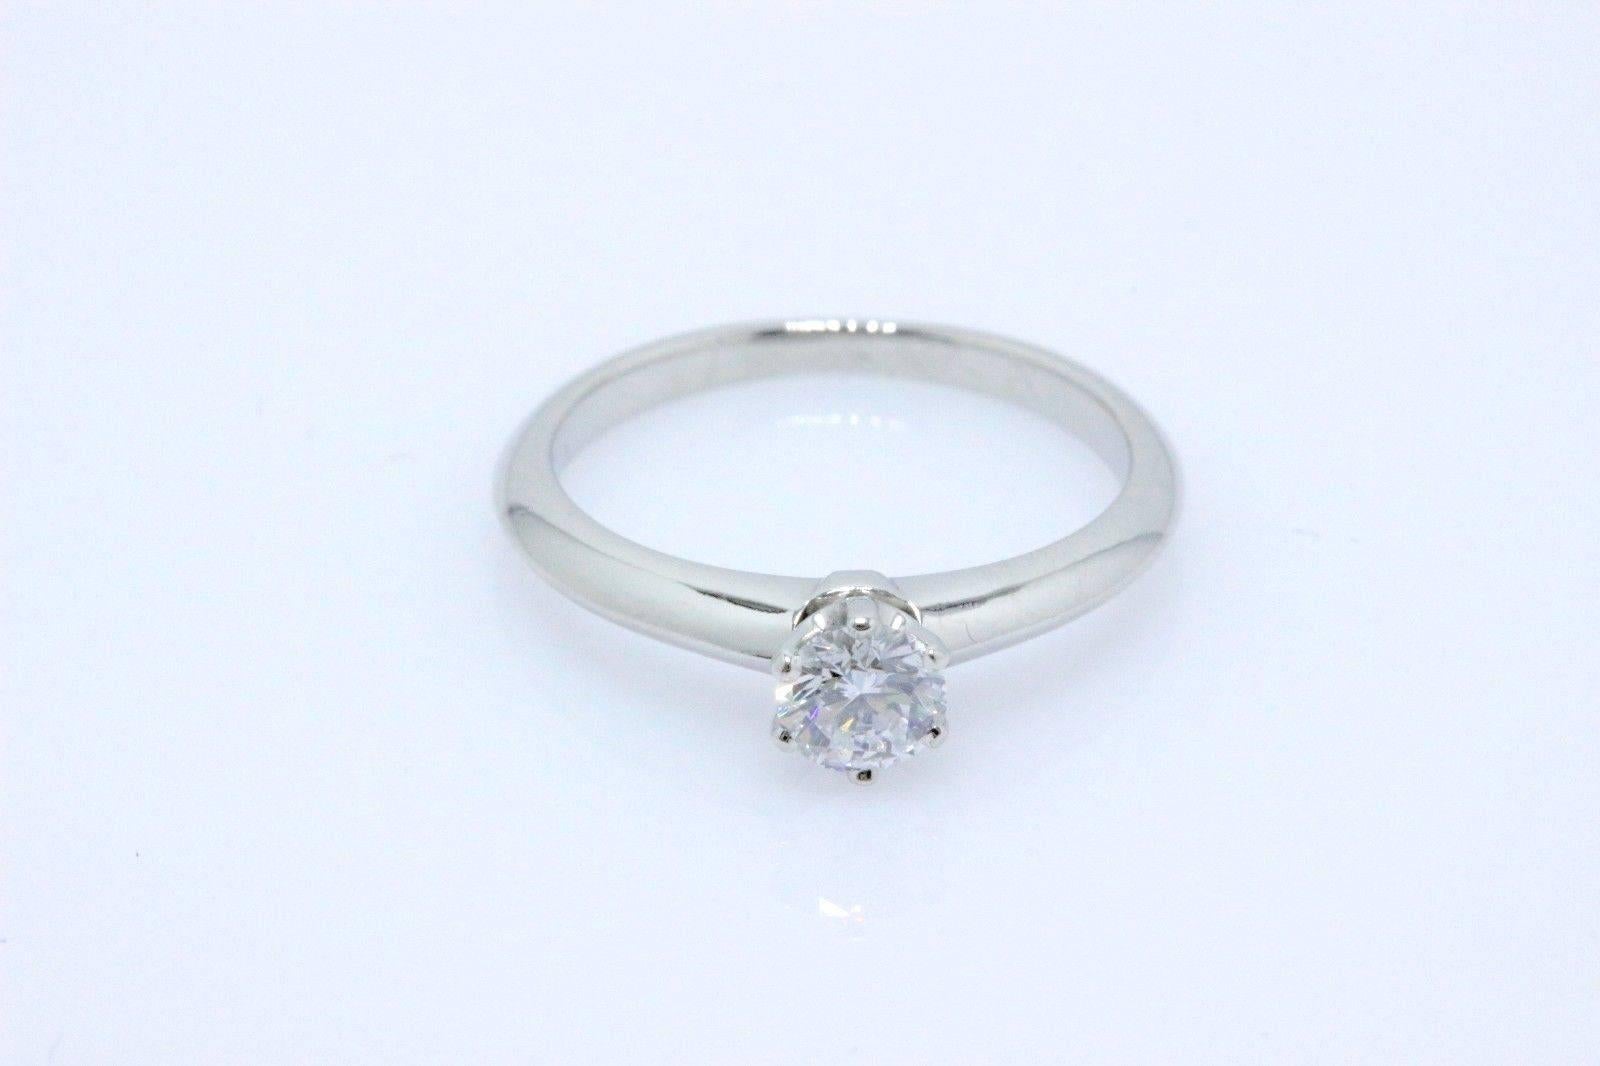 Tiffany & Co.
Style:  Tiffany 6-Prong  Classic Solitaire
Serial Number:  D56592
Metal:  Platinum PT950
Ring Size:  5 - Sizable
Total Carat Weight: 0.32 TCW
Diamond Shape:  Round Brilliant Diamond 0.32 CTS 
Color & Clarity: D / VVS2
Hallmark: 